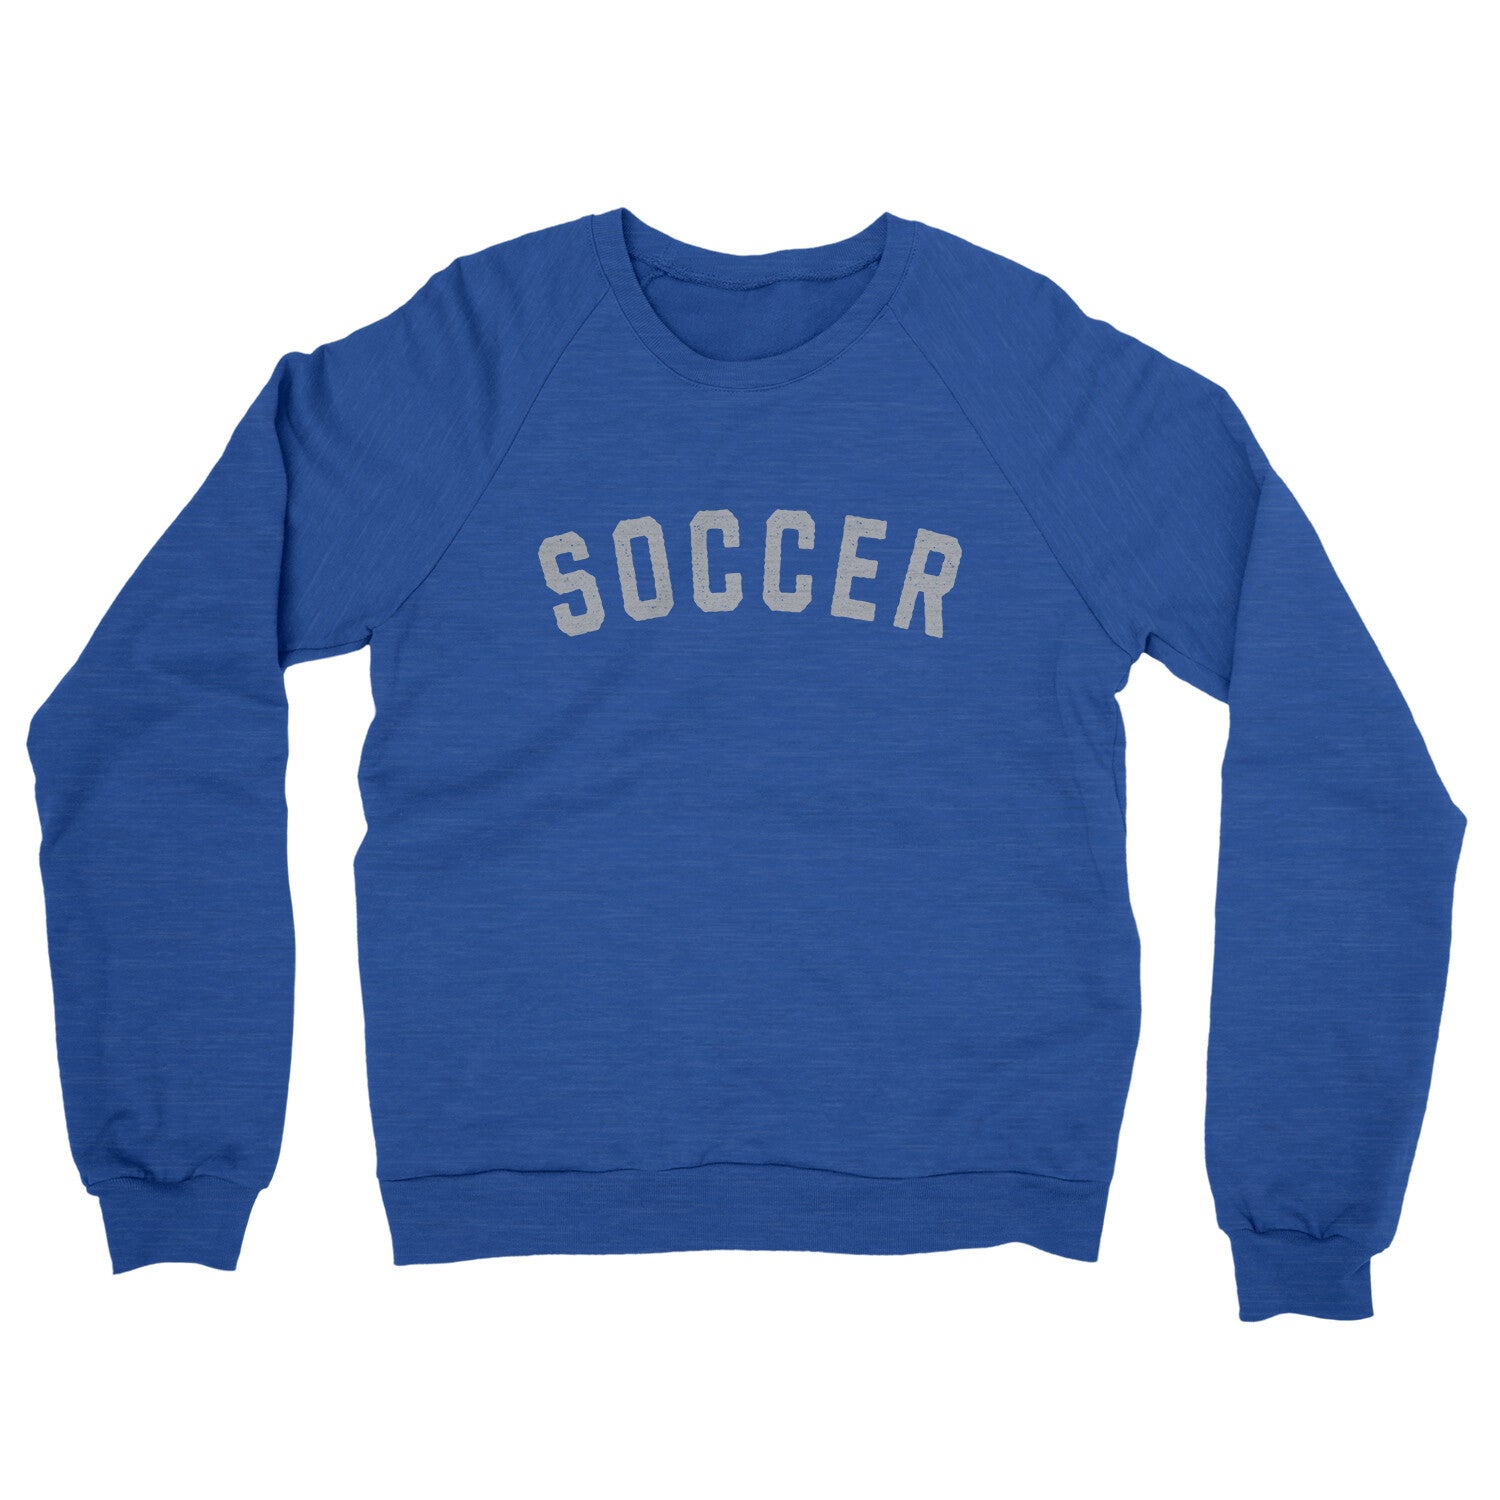 Soccer in Heather Royal Color